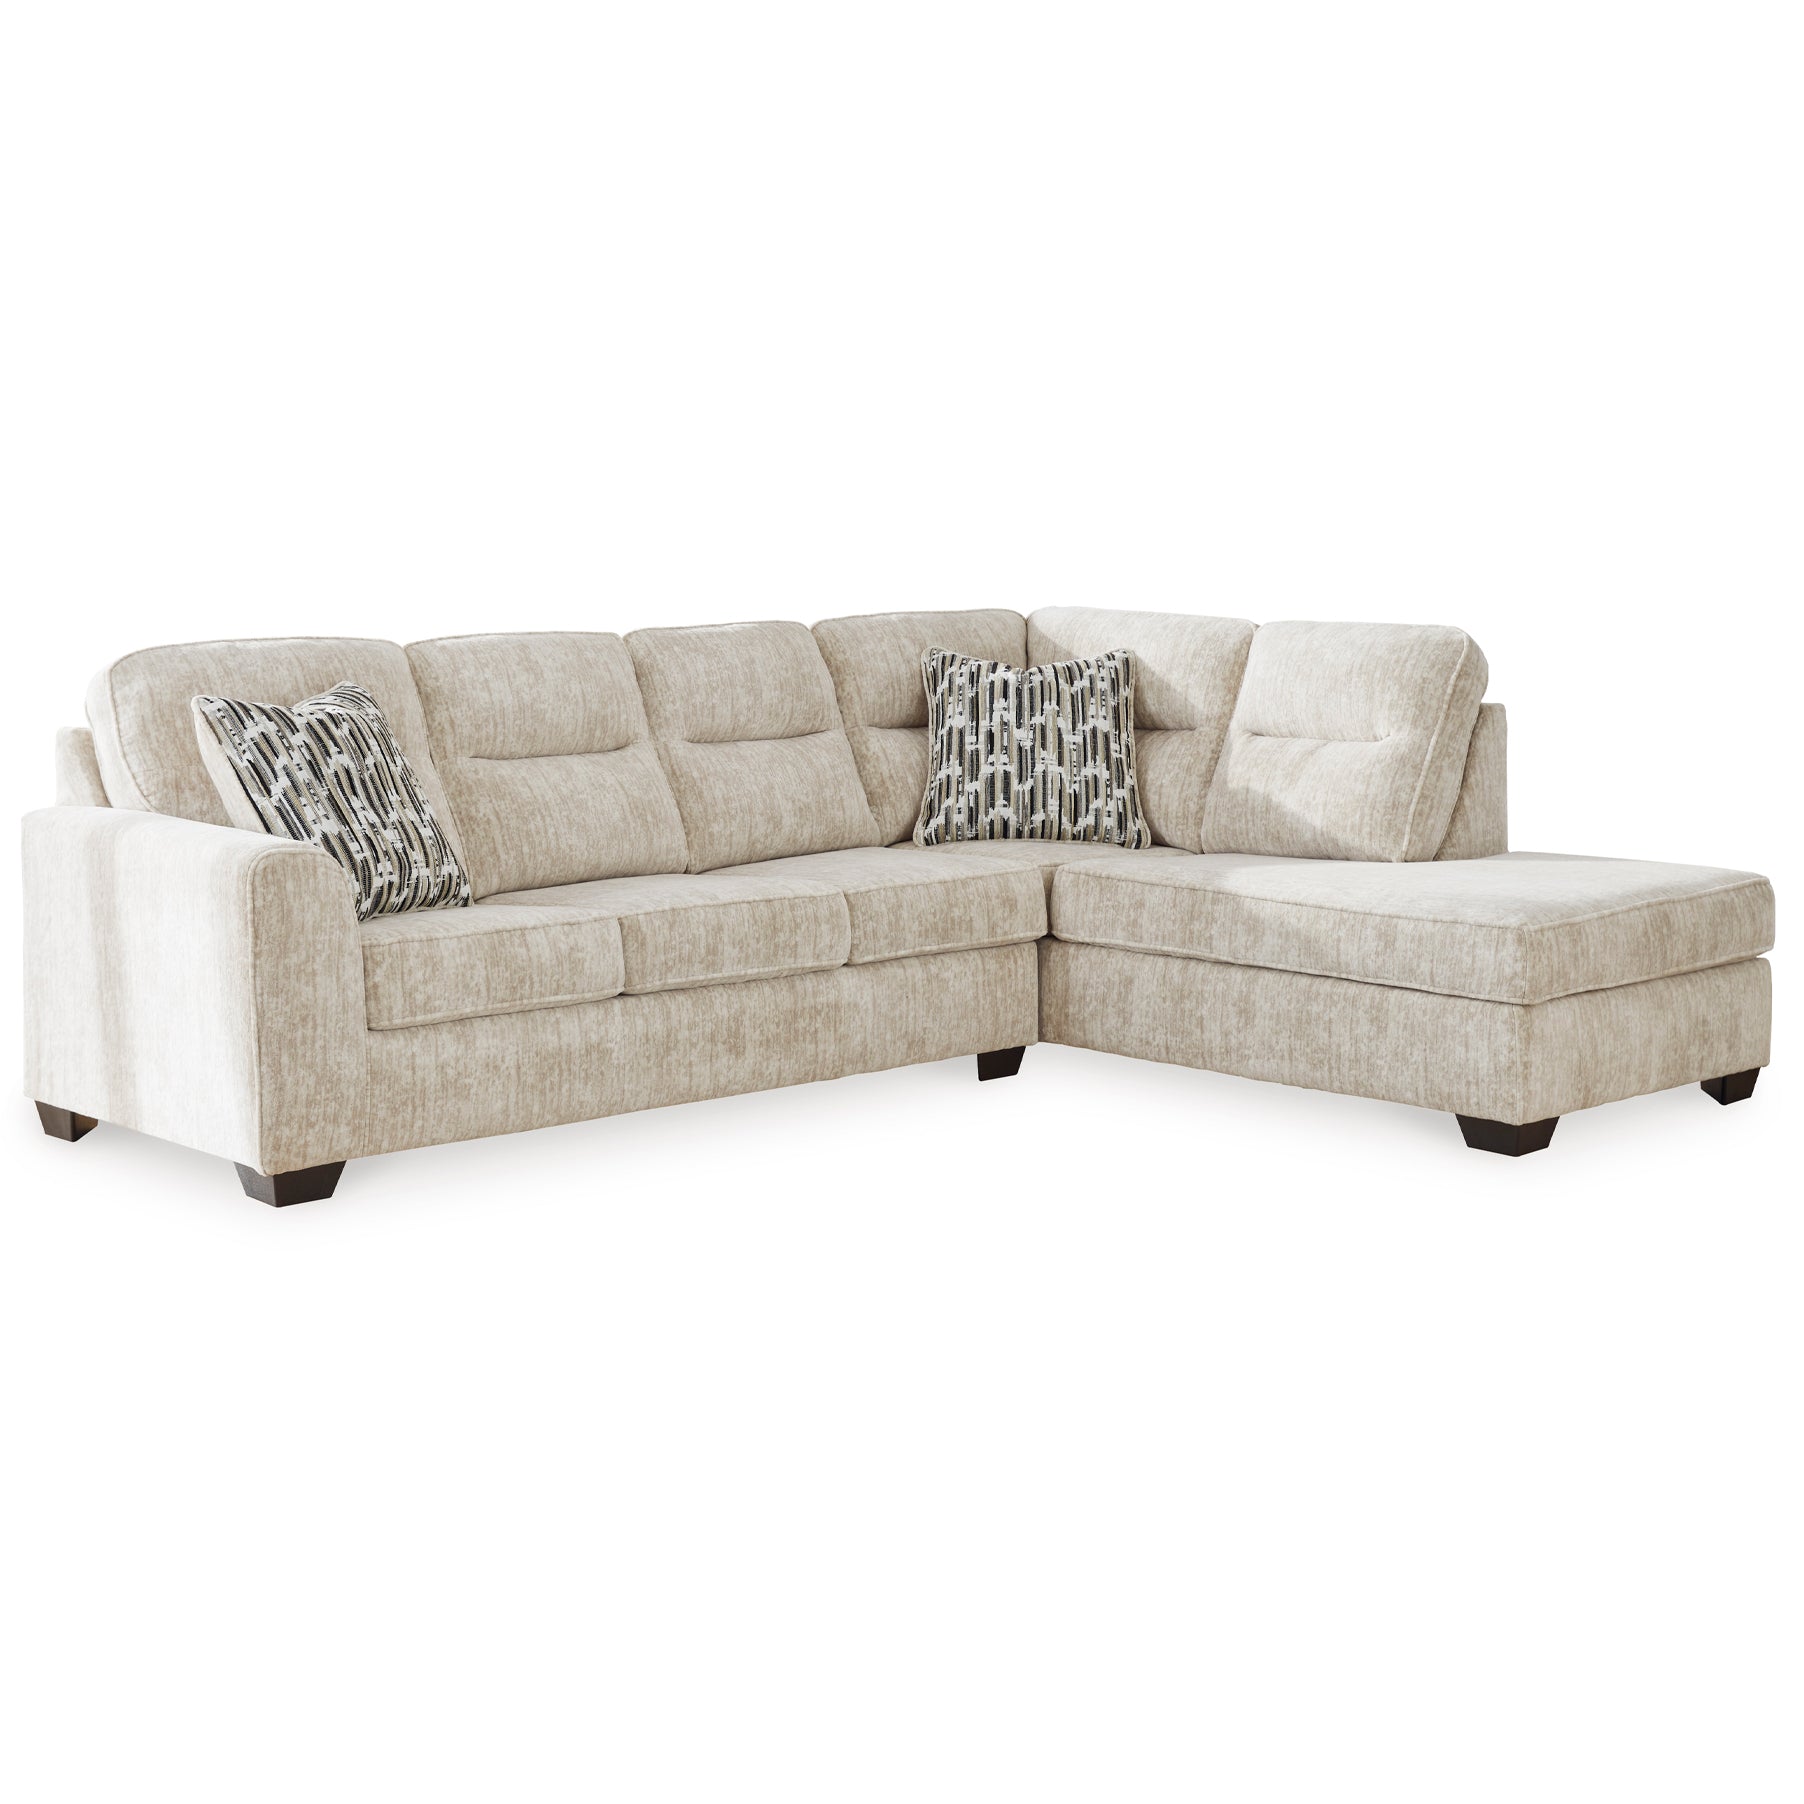 Lonoke 2-Piece Sectional with Chaise in Parchment Color